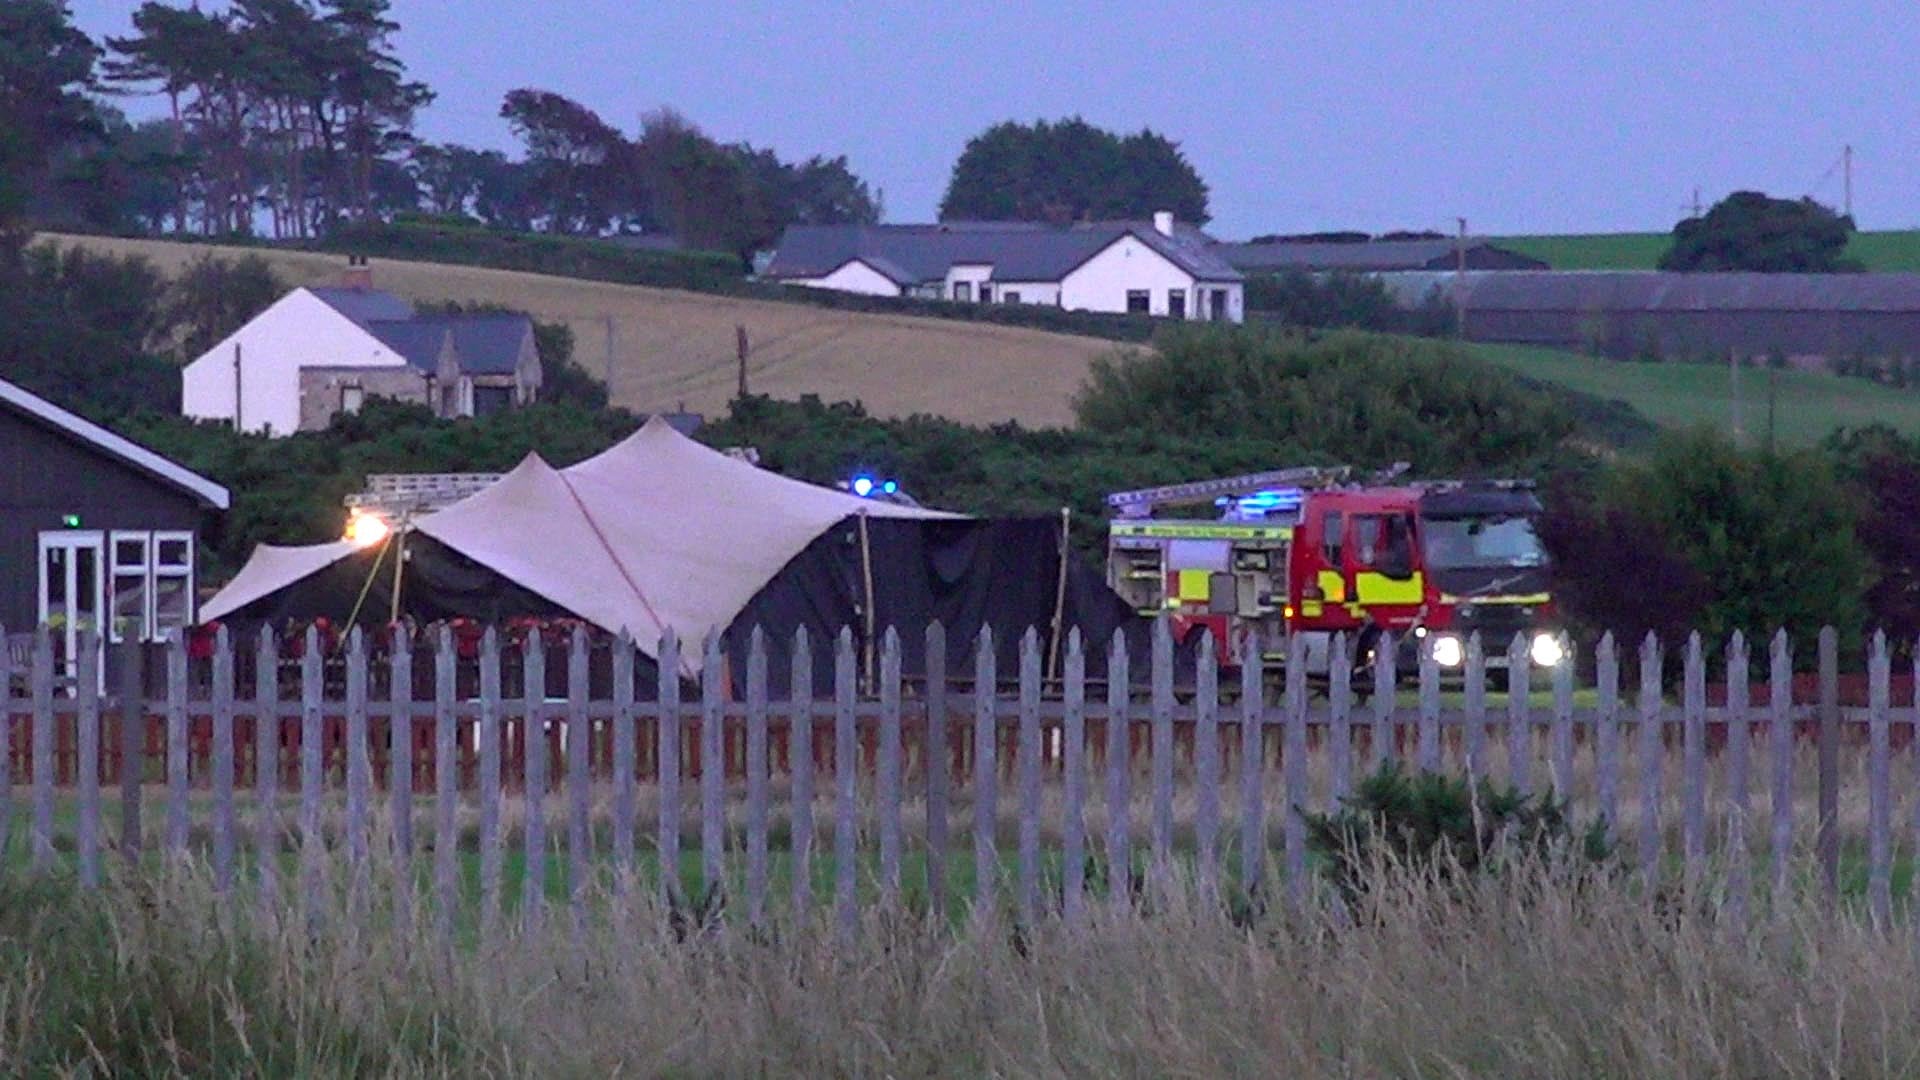 Emergency services attended the scene at Newtownards airport